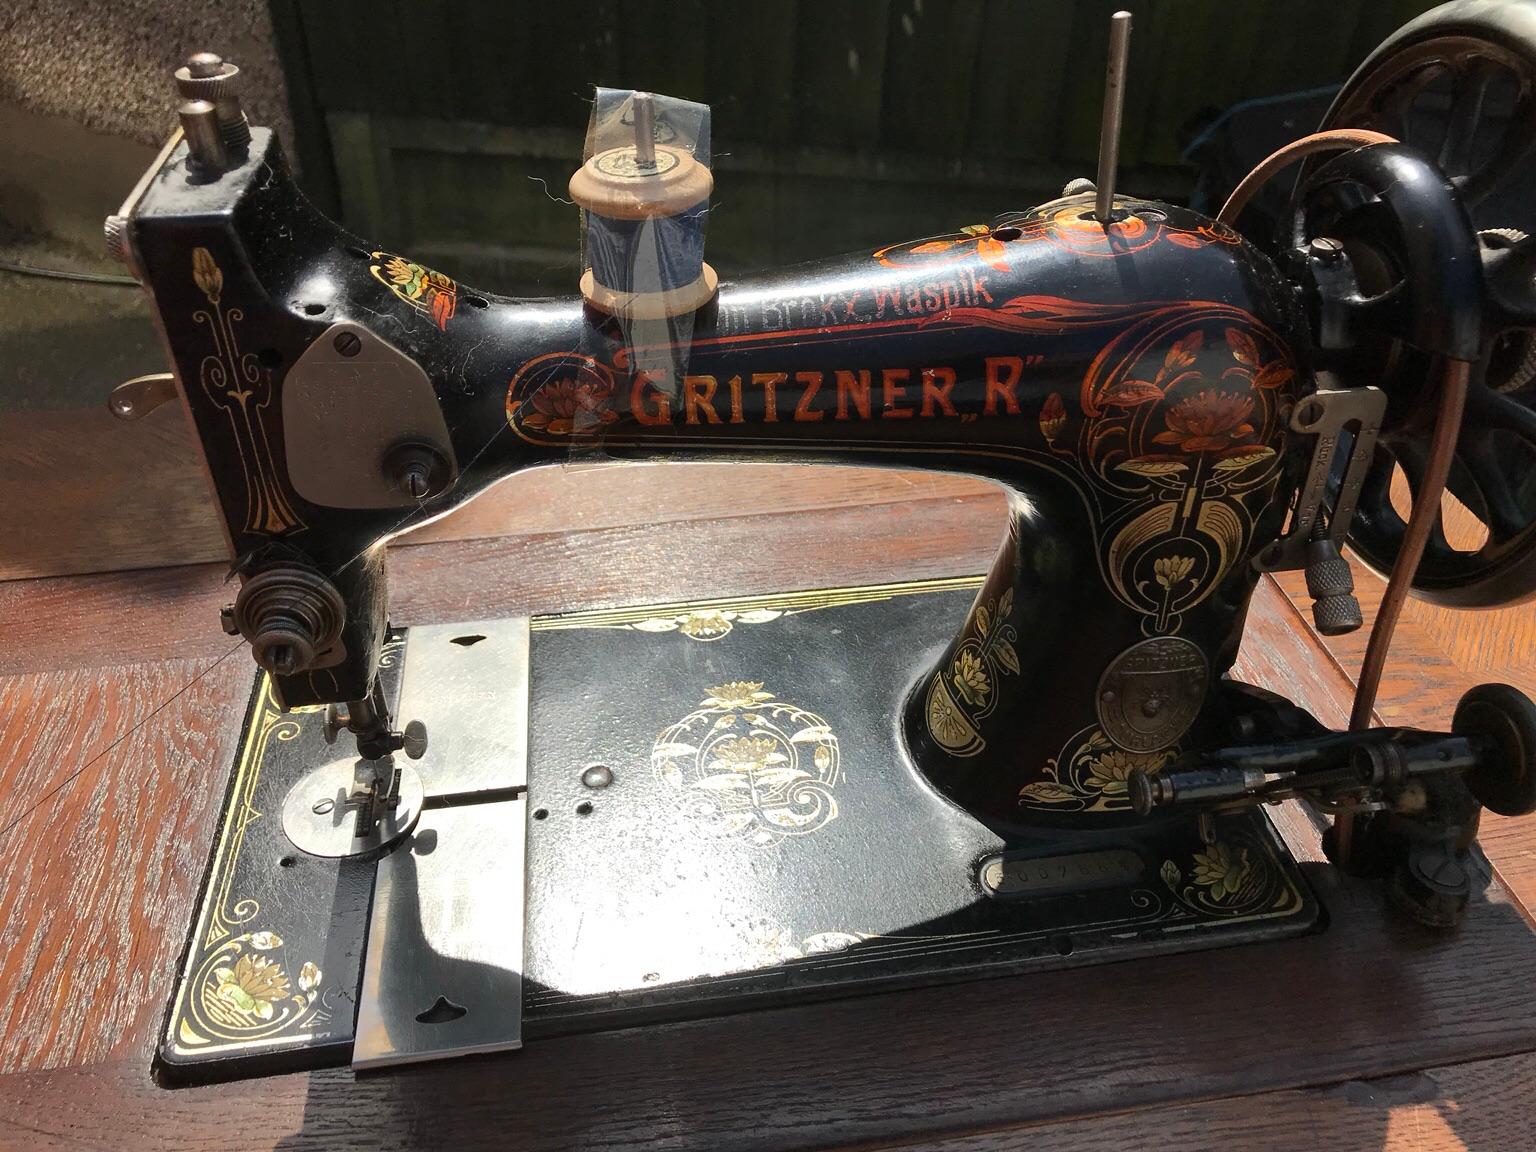 Gritzner Cabinet Treadle Sewing Machine In Rm15 London Borough Of